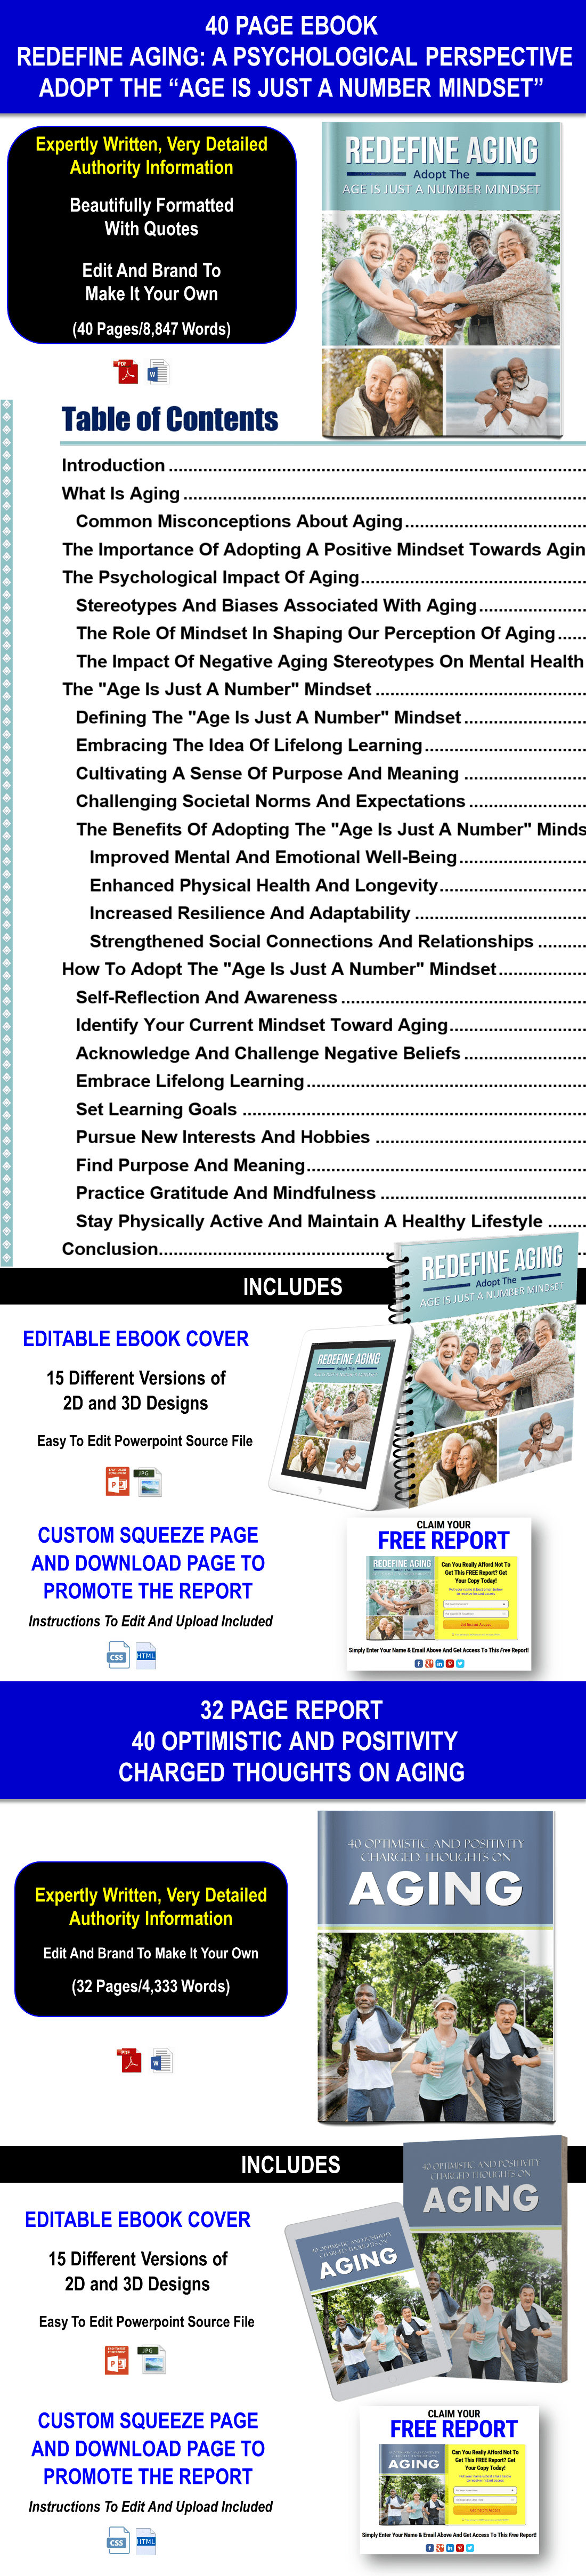 Redefine Aging – Adopt The Age Is Just A Number Mindset Giant Content Pack with PLR Rights